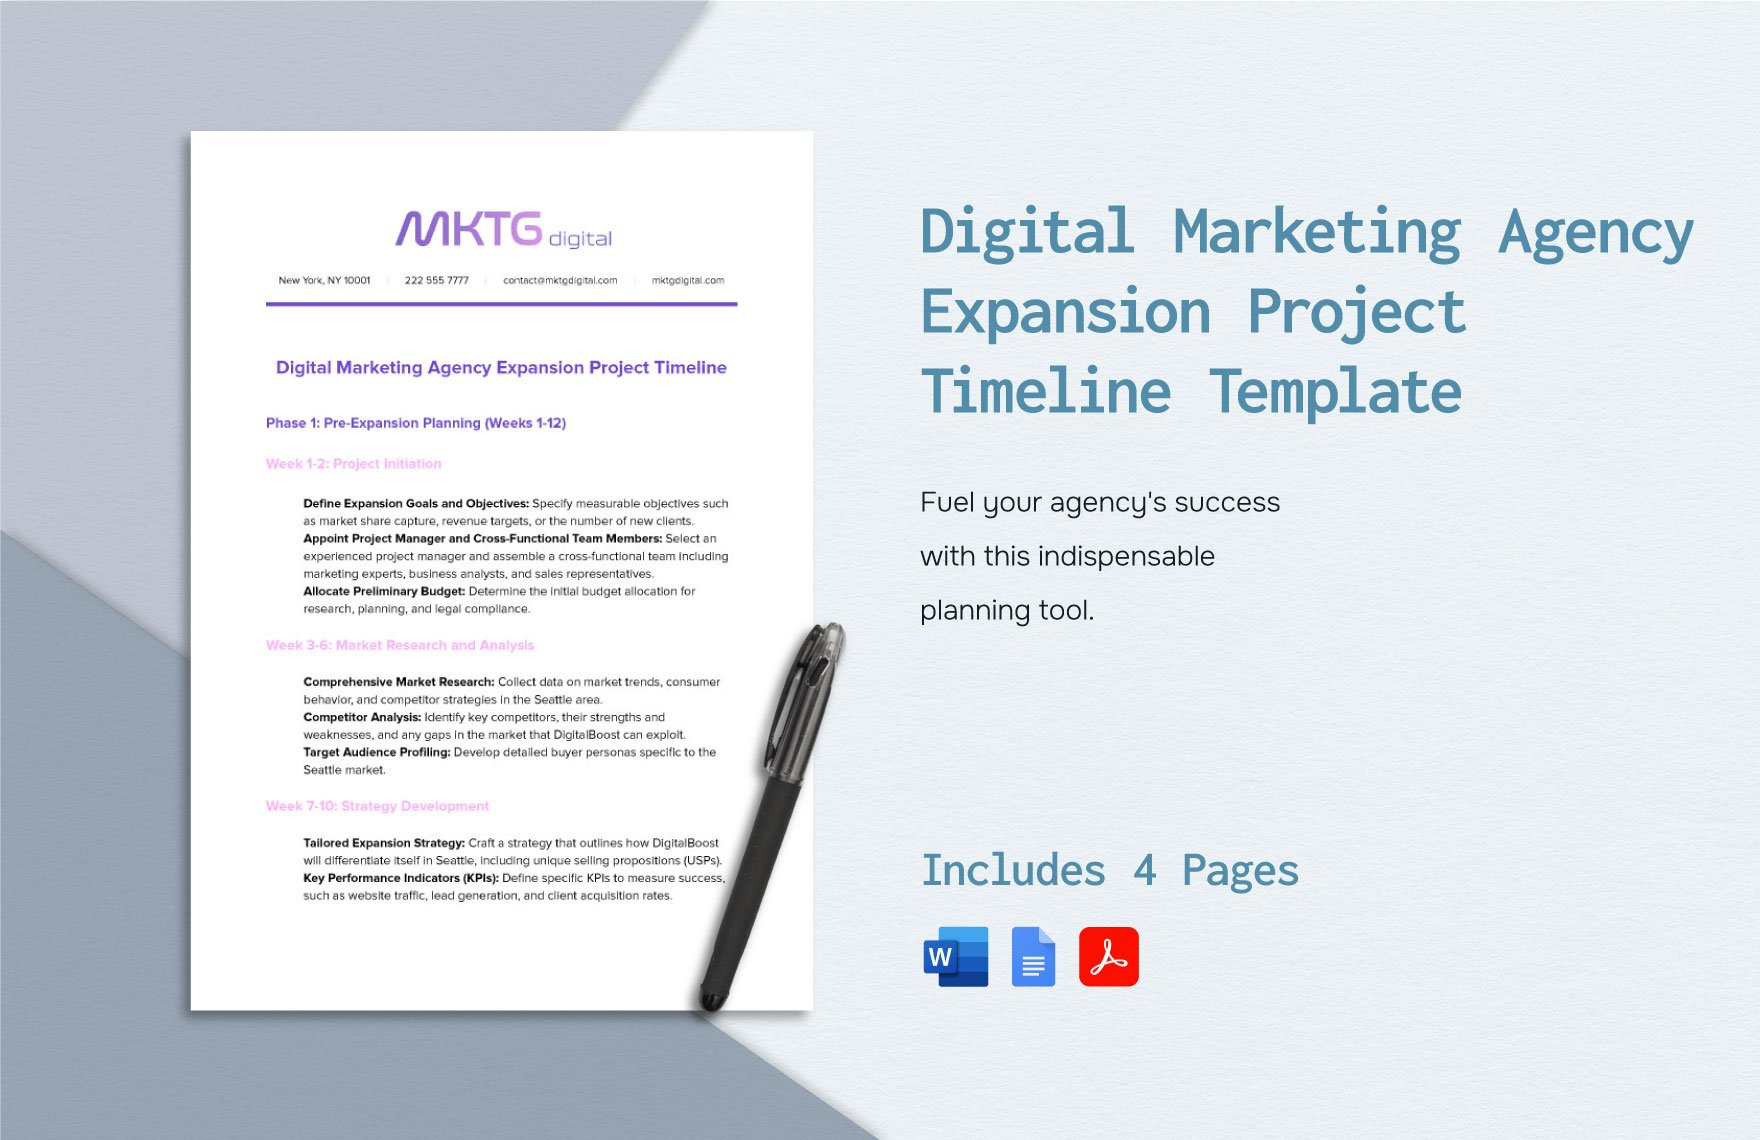 Digital Marketing Agency Expansion Project Timeline Template